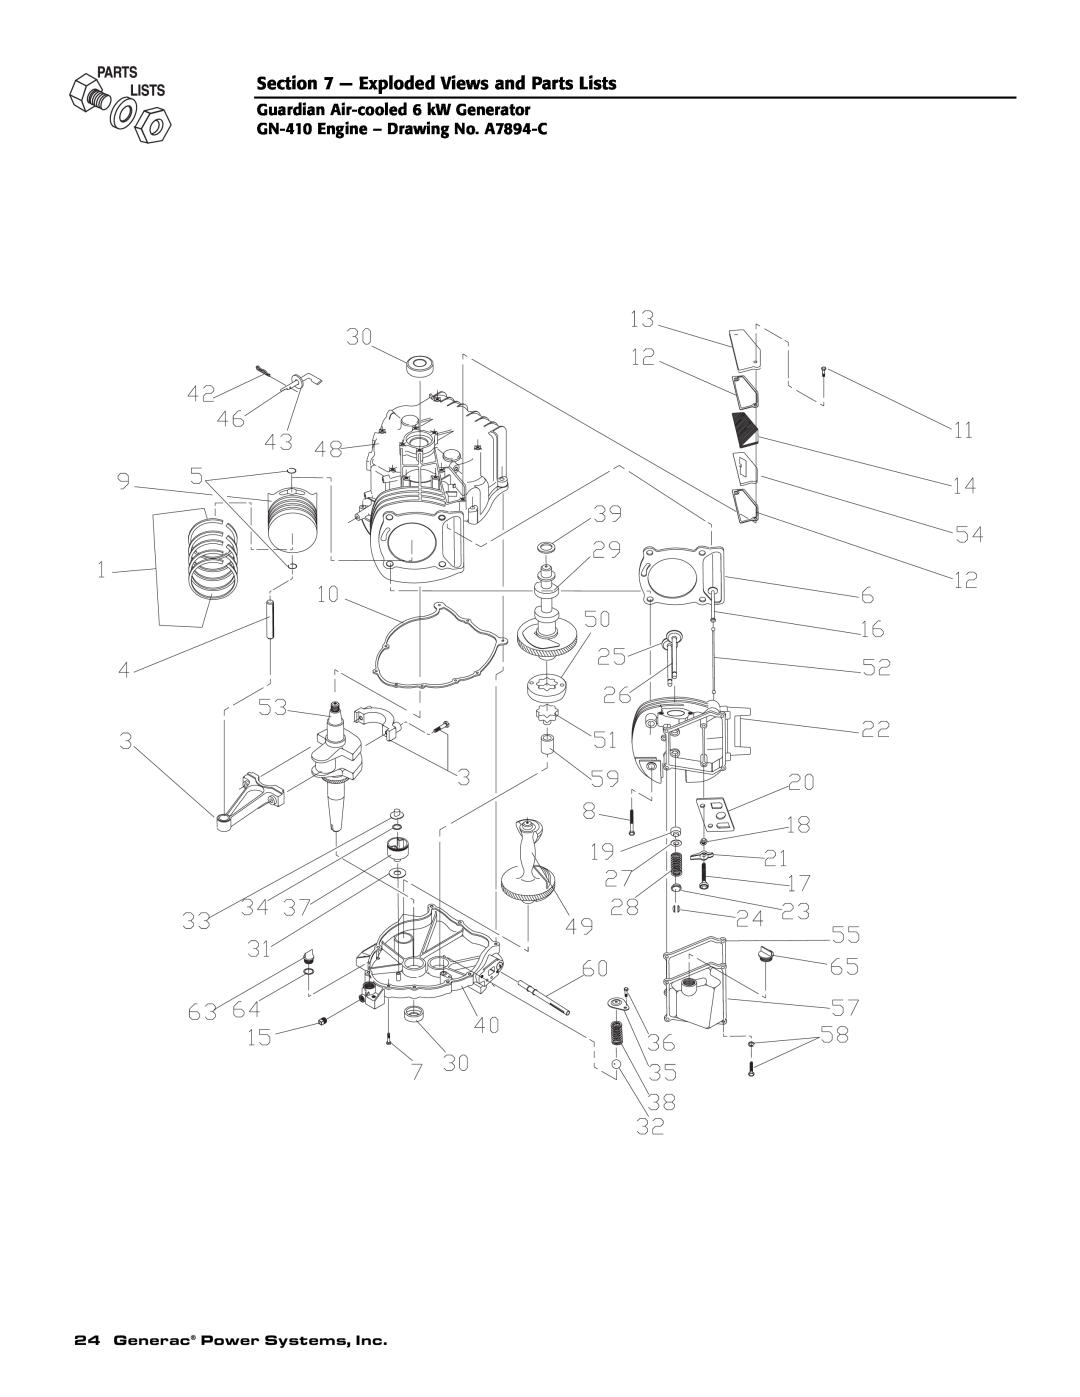 Guardian Technologies C2369 manual Exploded Views and Parts Lists, Generac Power Systems, Inc 